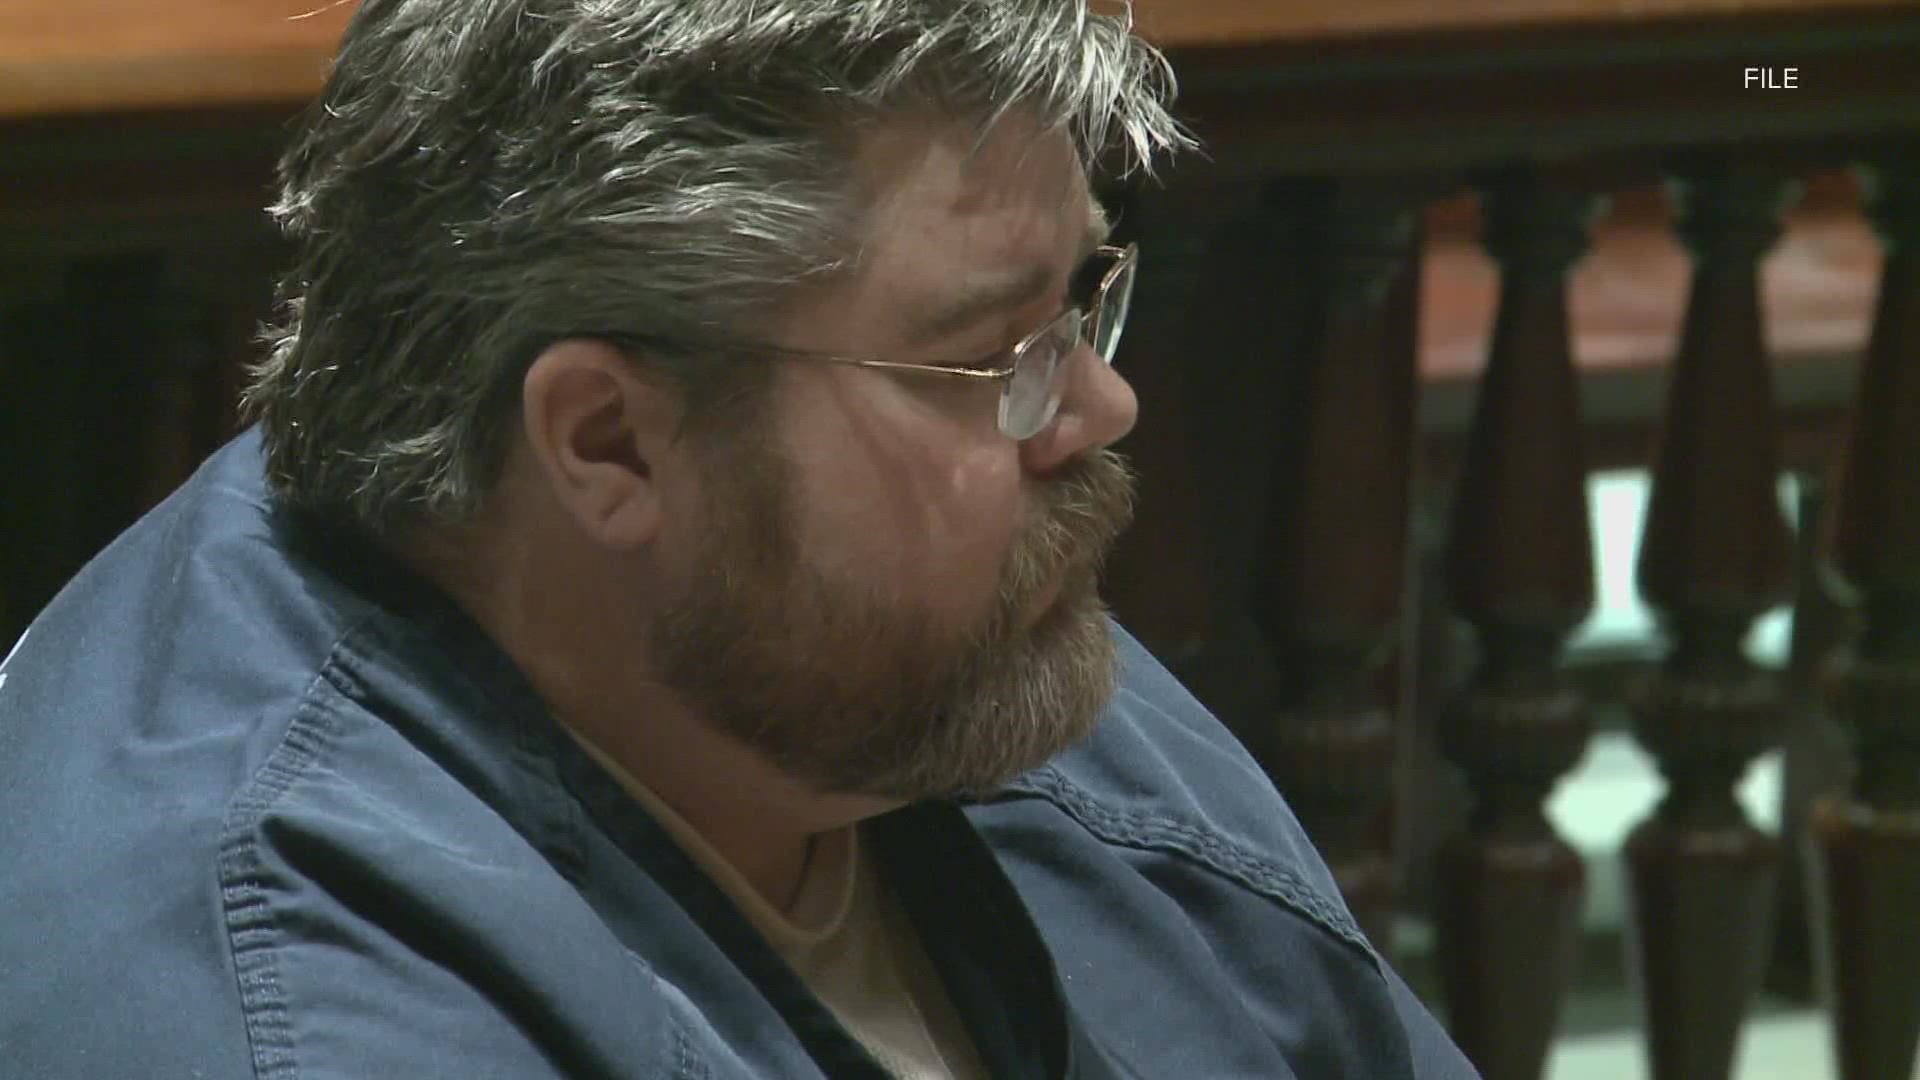 Steven Downs is charged with the 1993 murder and sexual assault of a woman from Alaska.